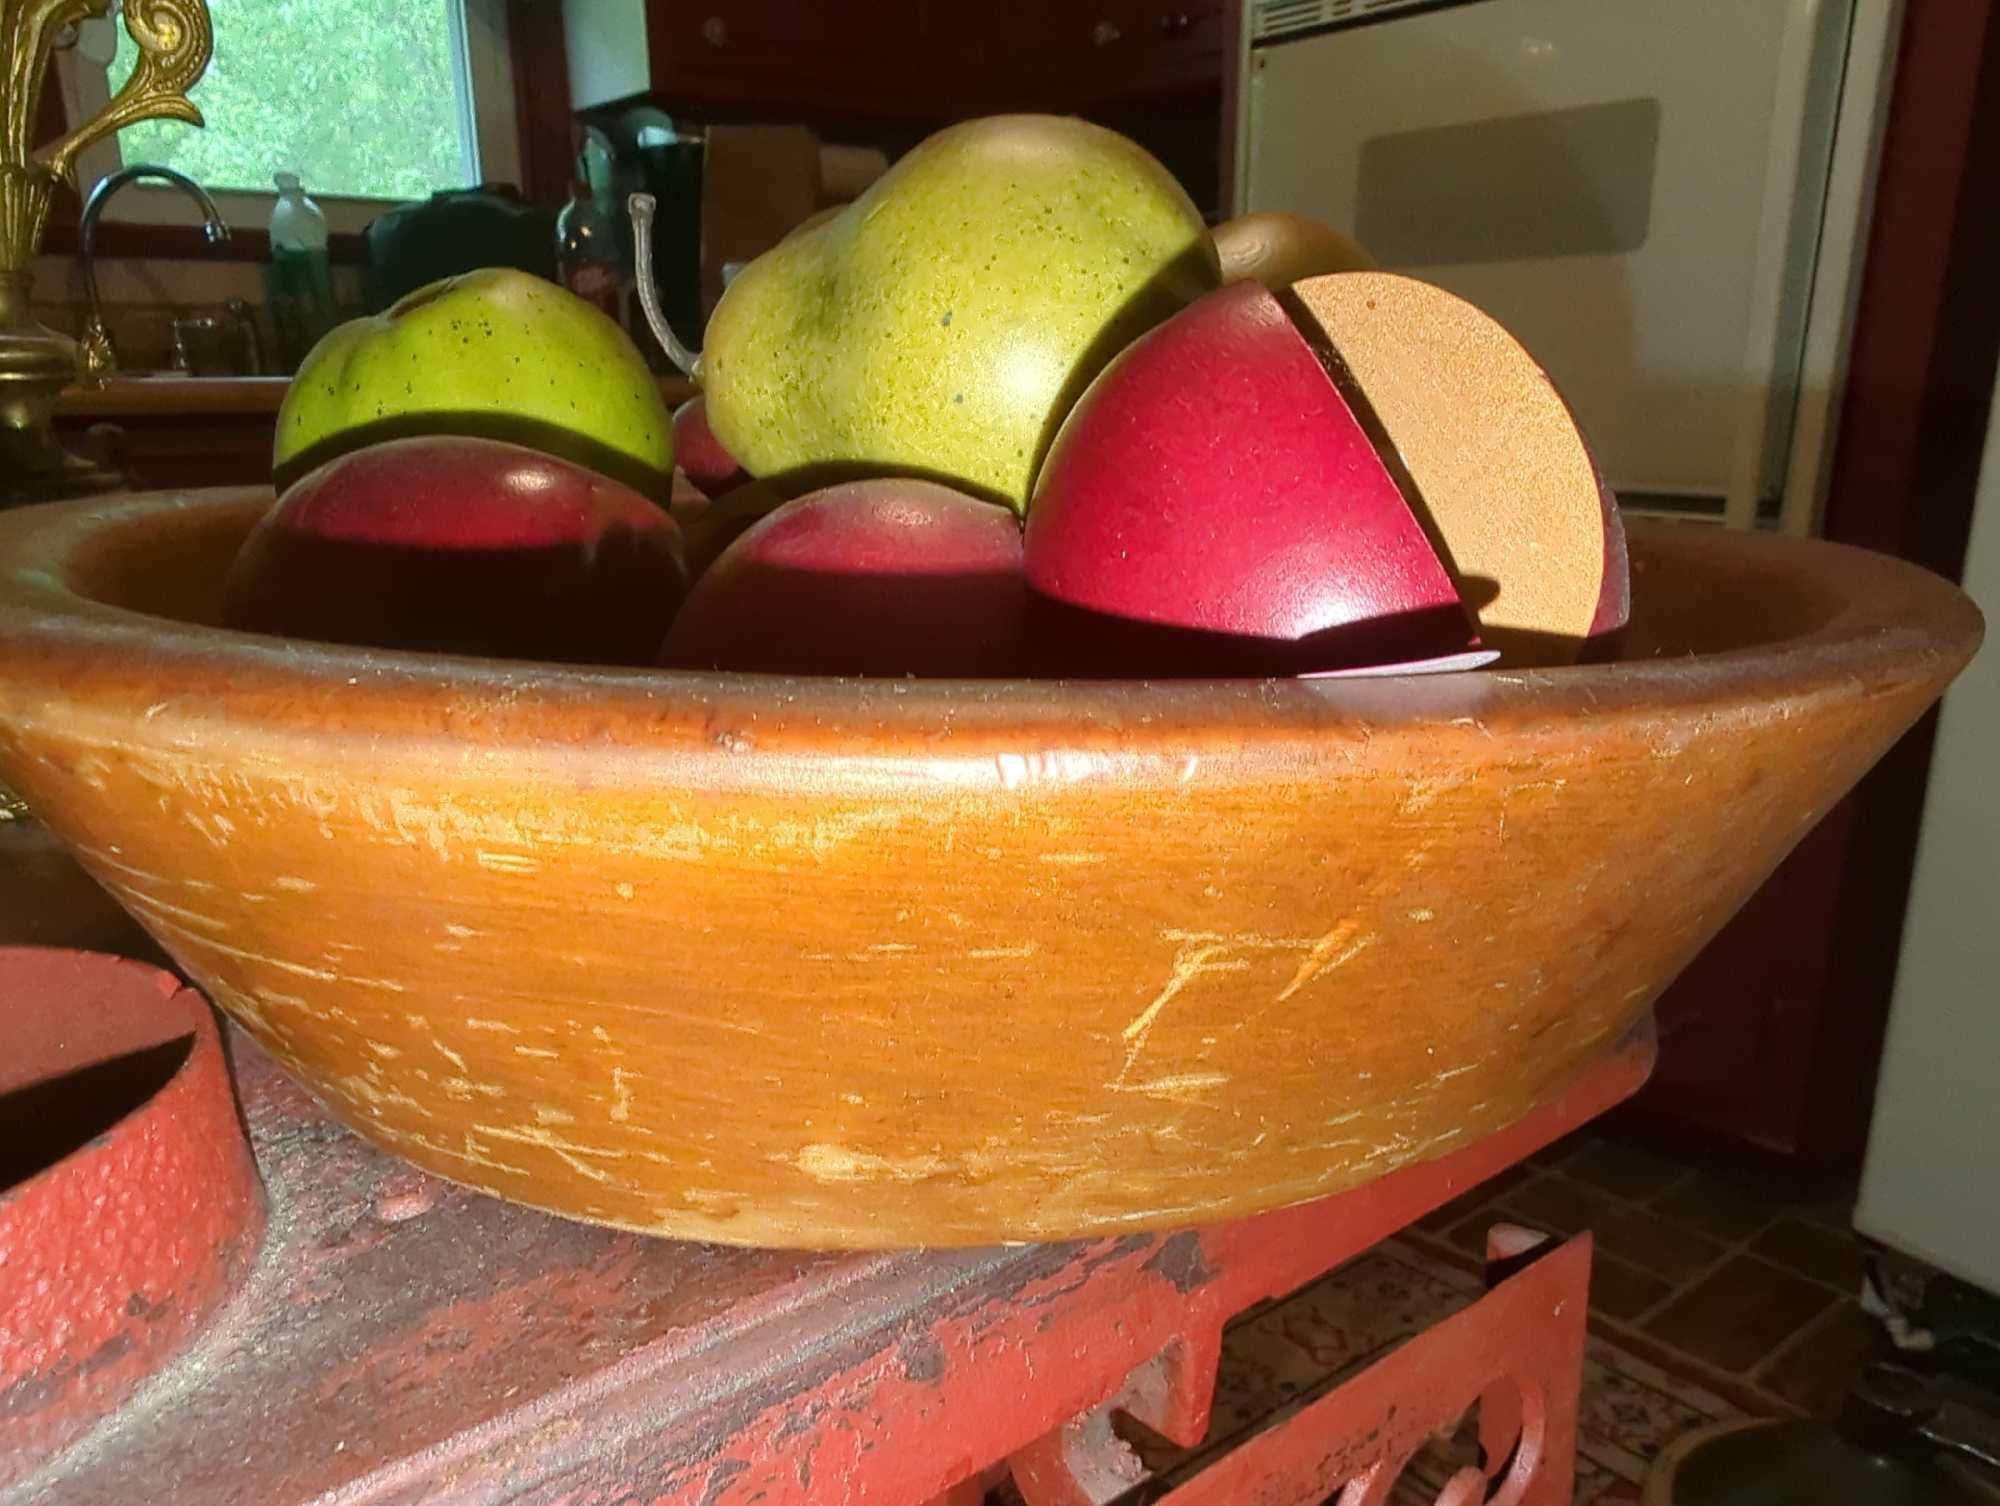 (KIT) WOODEN BOWL OF WOODEN FAKE FRUIT, MEASURE APPROXIMATELY 16 IN X 3 IN. WHAT YOU SEE IN PHOTOS